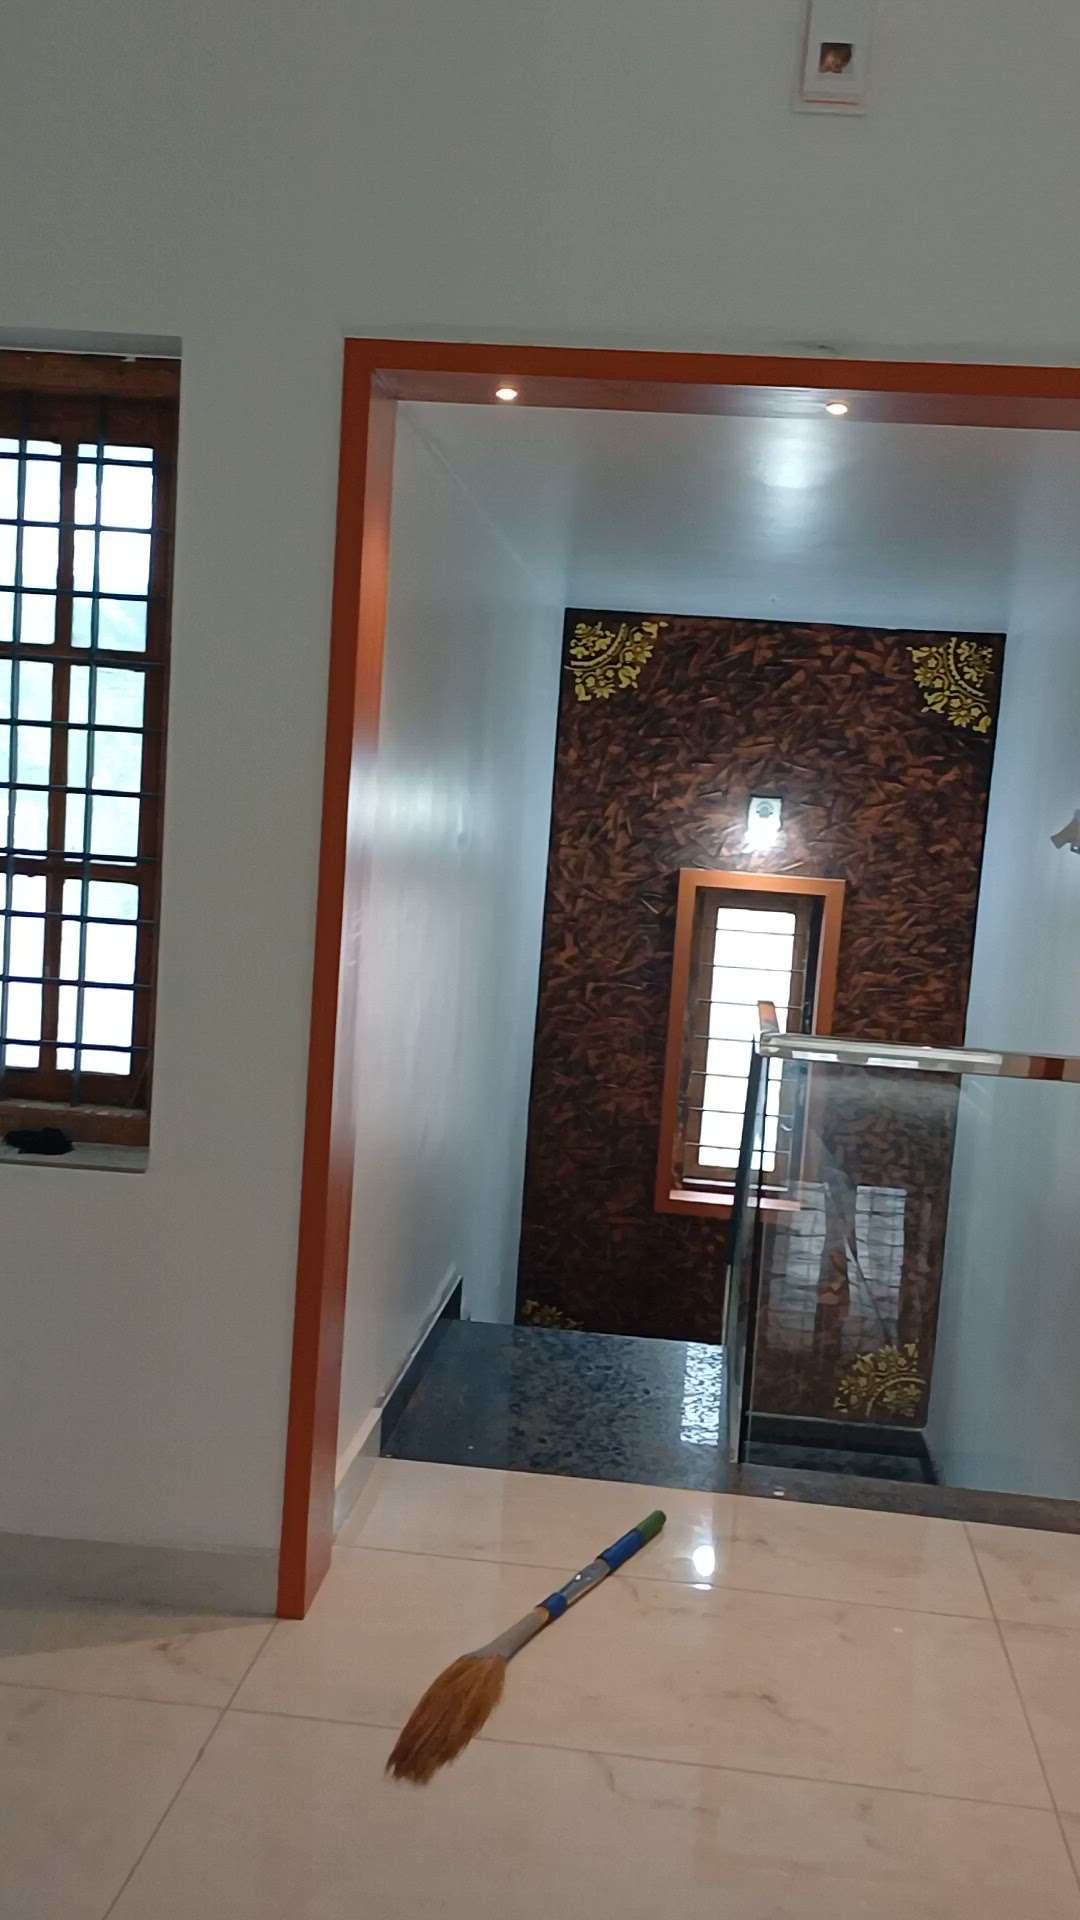 completed in wadakanchery